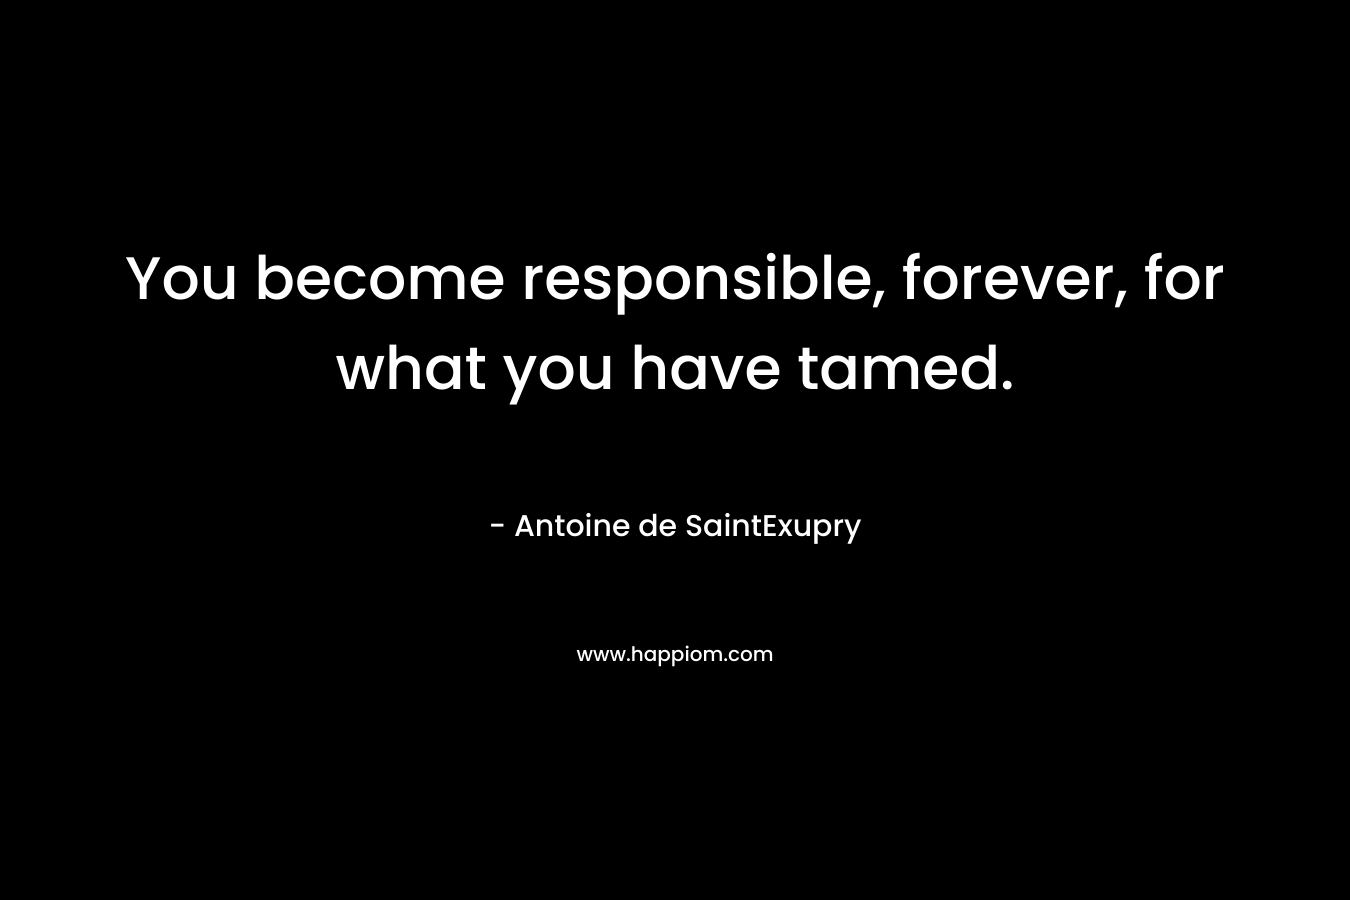 You become responsible, forever, for what you have tamed. – Antoine de SaintExupry